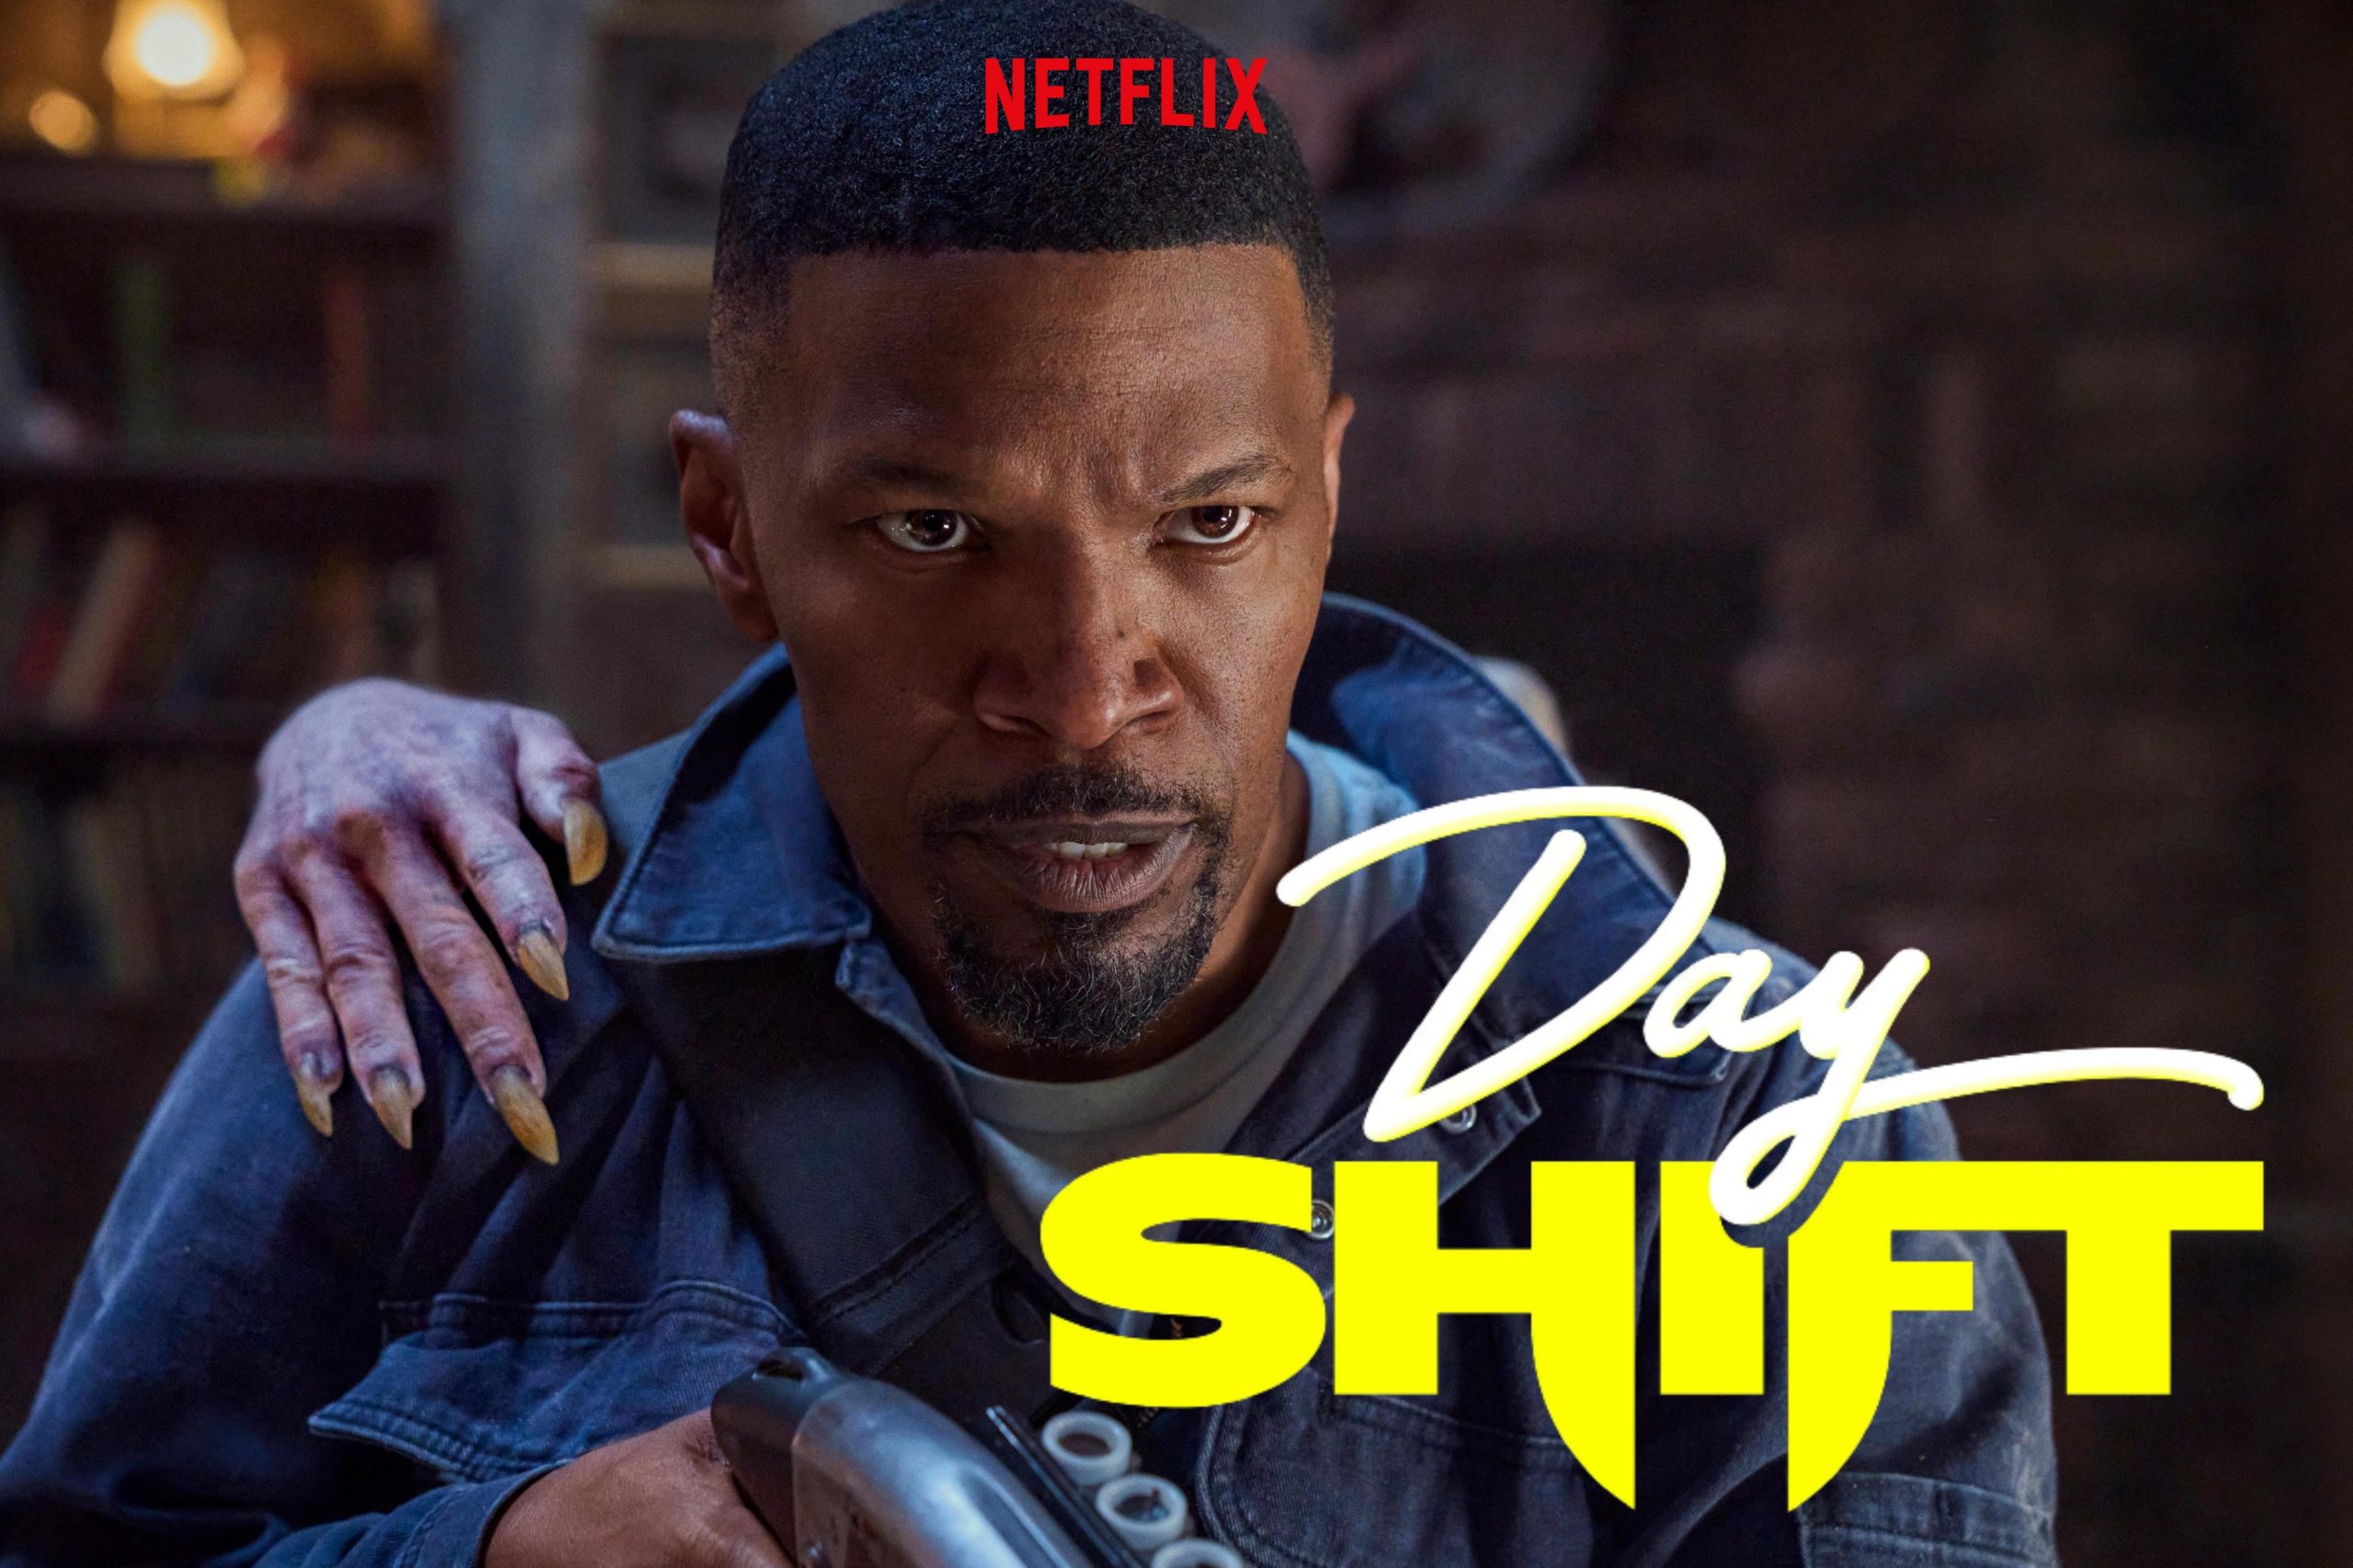 Is Day Shift (2022) on Netflix